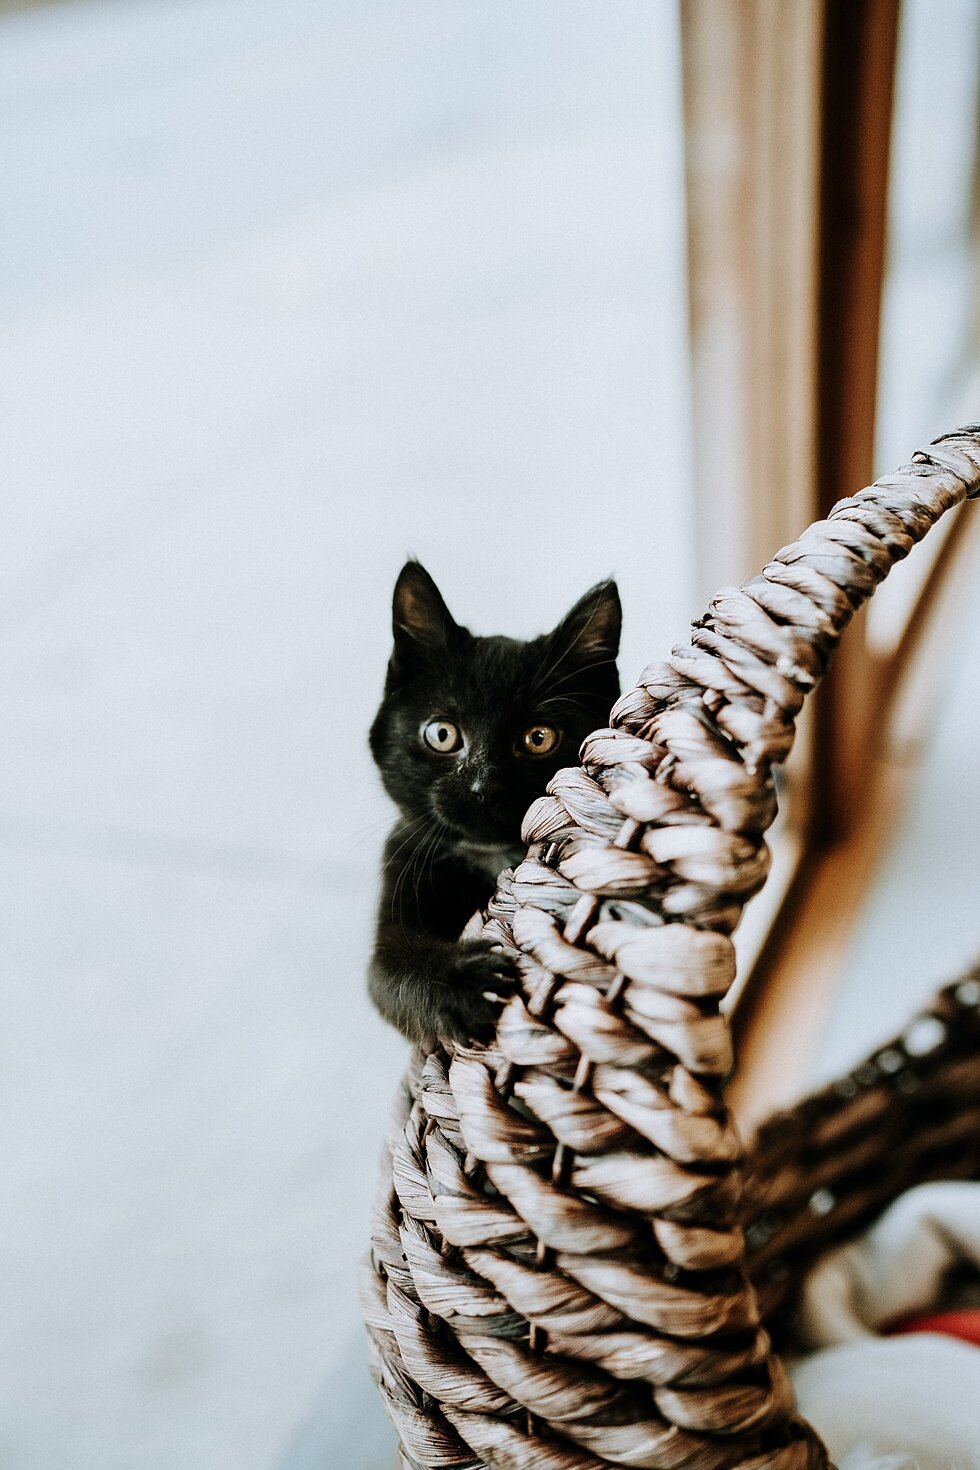  Cats often double as acrobats and are sleek and sly! #engagementgoals #proposalphotographer #engaged #photographedengagement #kentuckyphotographer #indianaphotographer #louisvillephotographer #proposalphotos #savethedatephotos #popthequestion #shesa